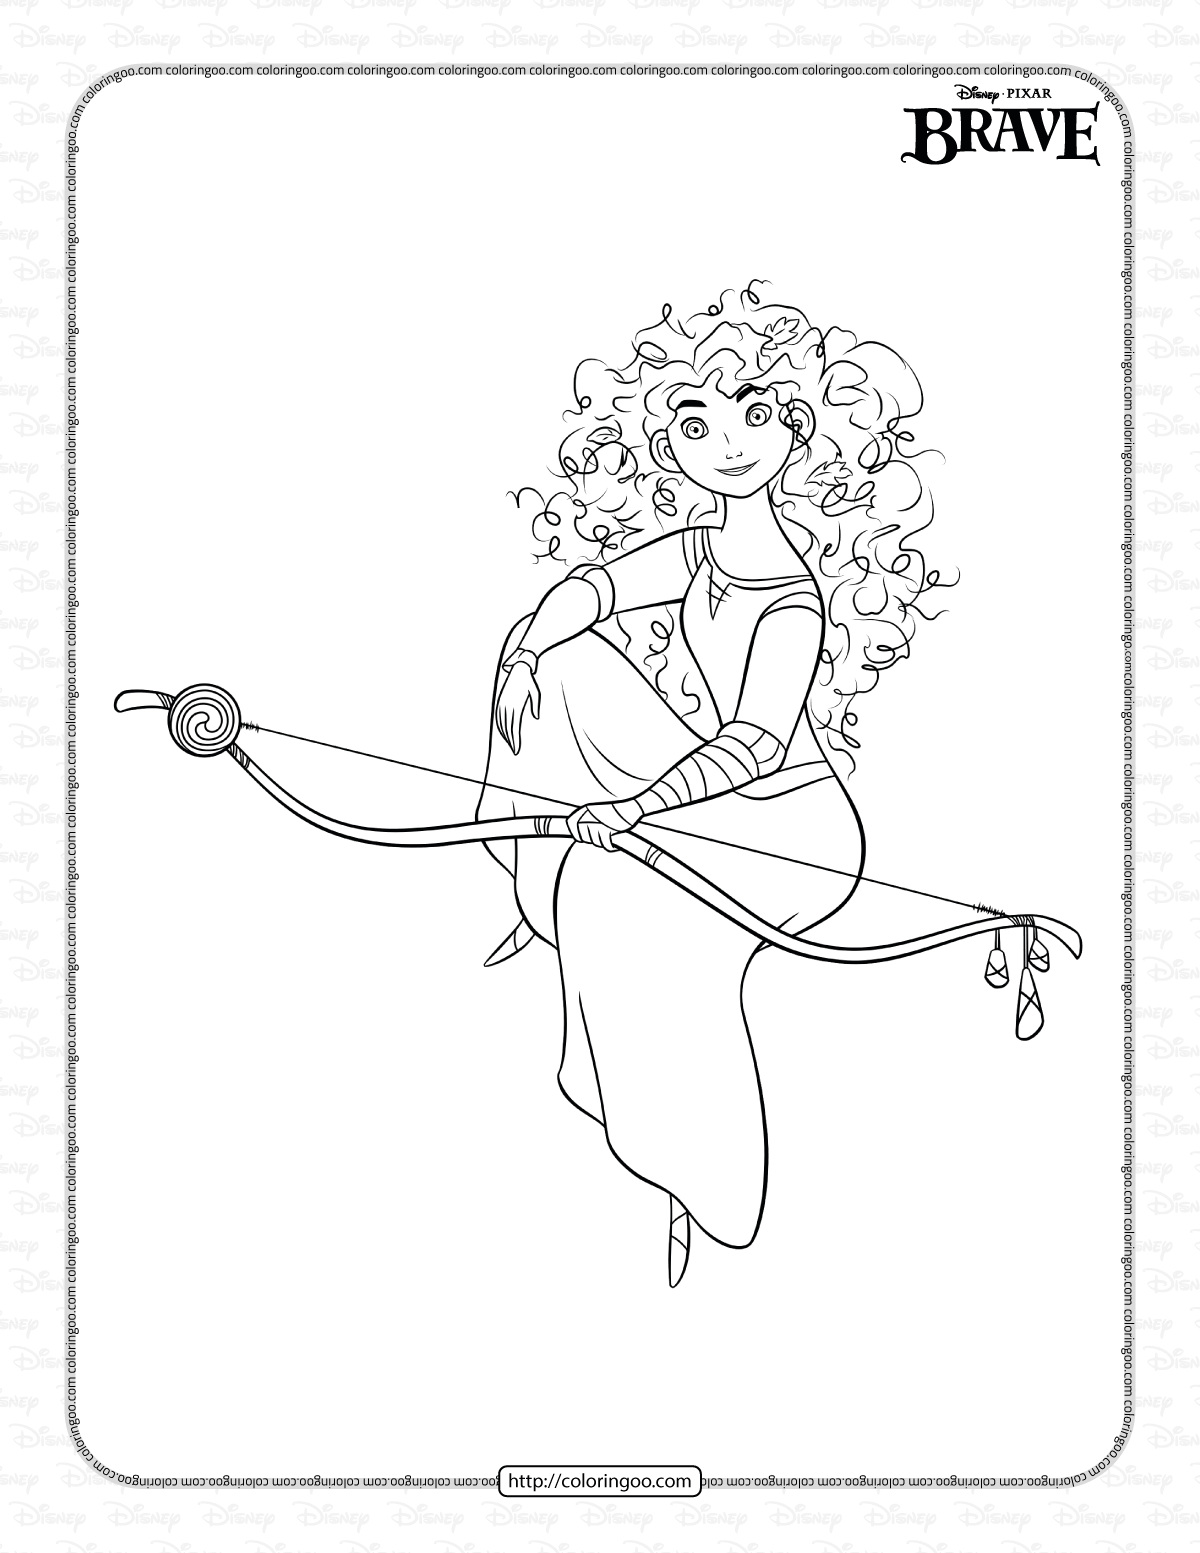 princess merida from brave coloring page